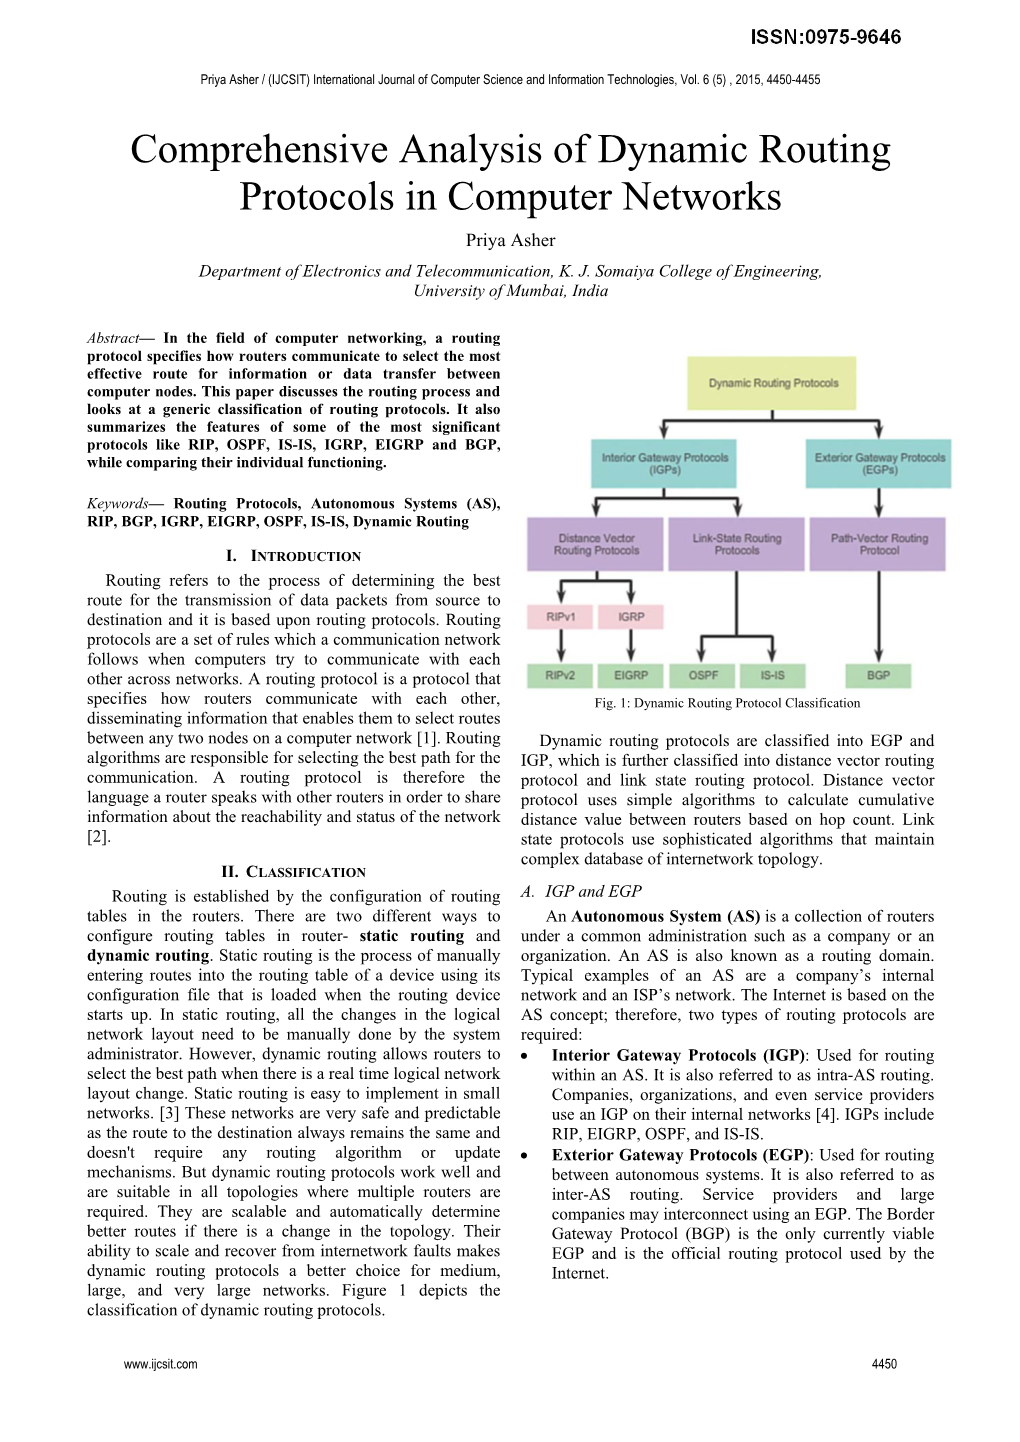 Comprehensive Analysis of Dynamic Routing Protocols in Computer Networks Priya Asher Department of Electronics and Telecommunication, K